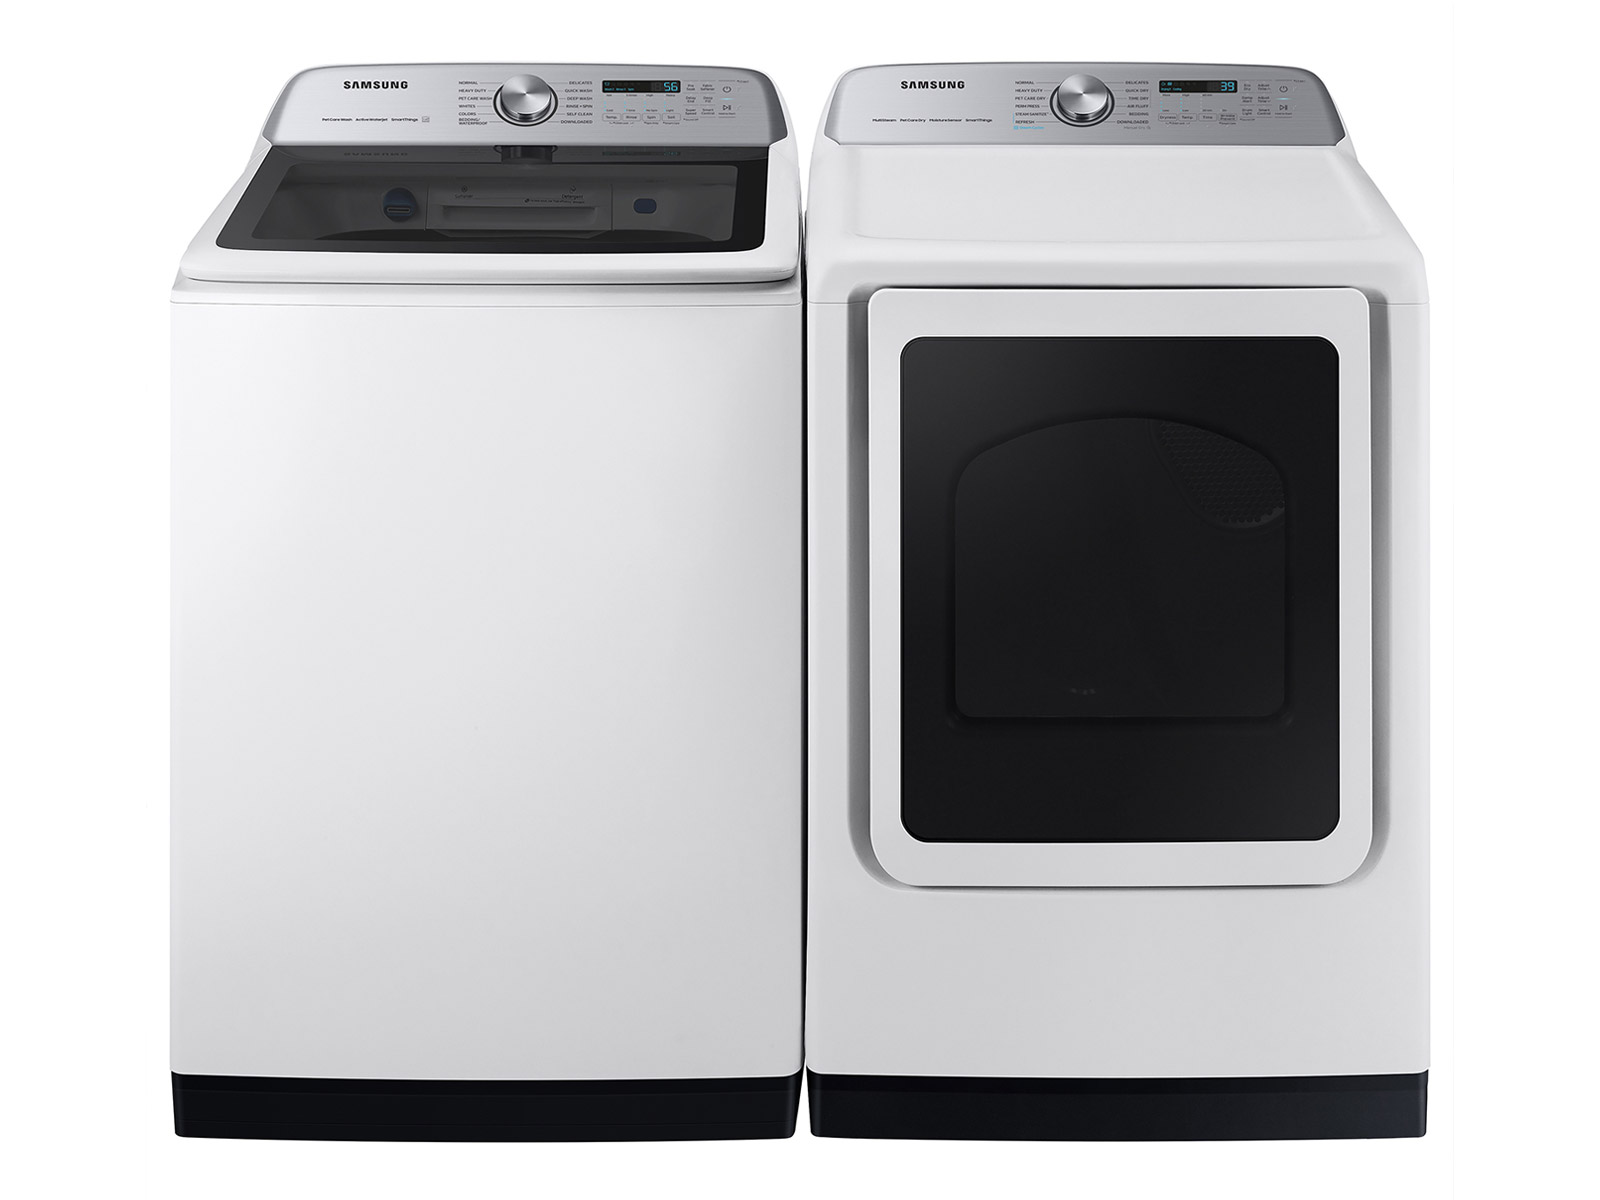 5.0 cu. ft. Large Capacity Top Load Washer with Deep Fill and EZ Access Tub  in Brushed Black Washers - WA50B5100AV/US